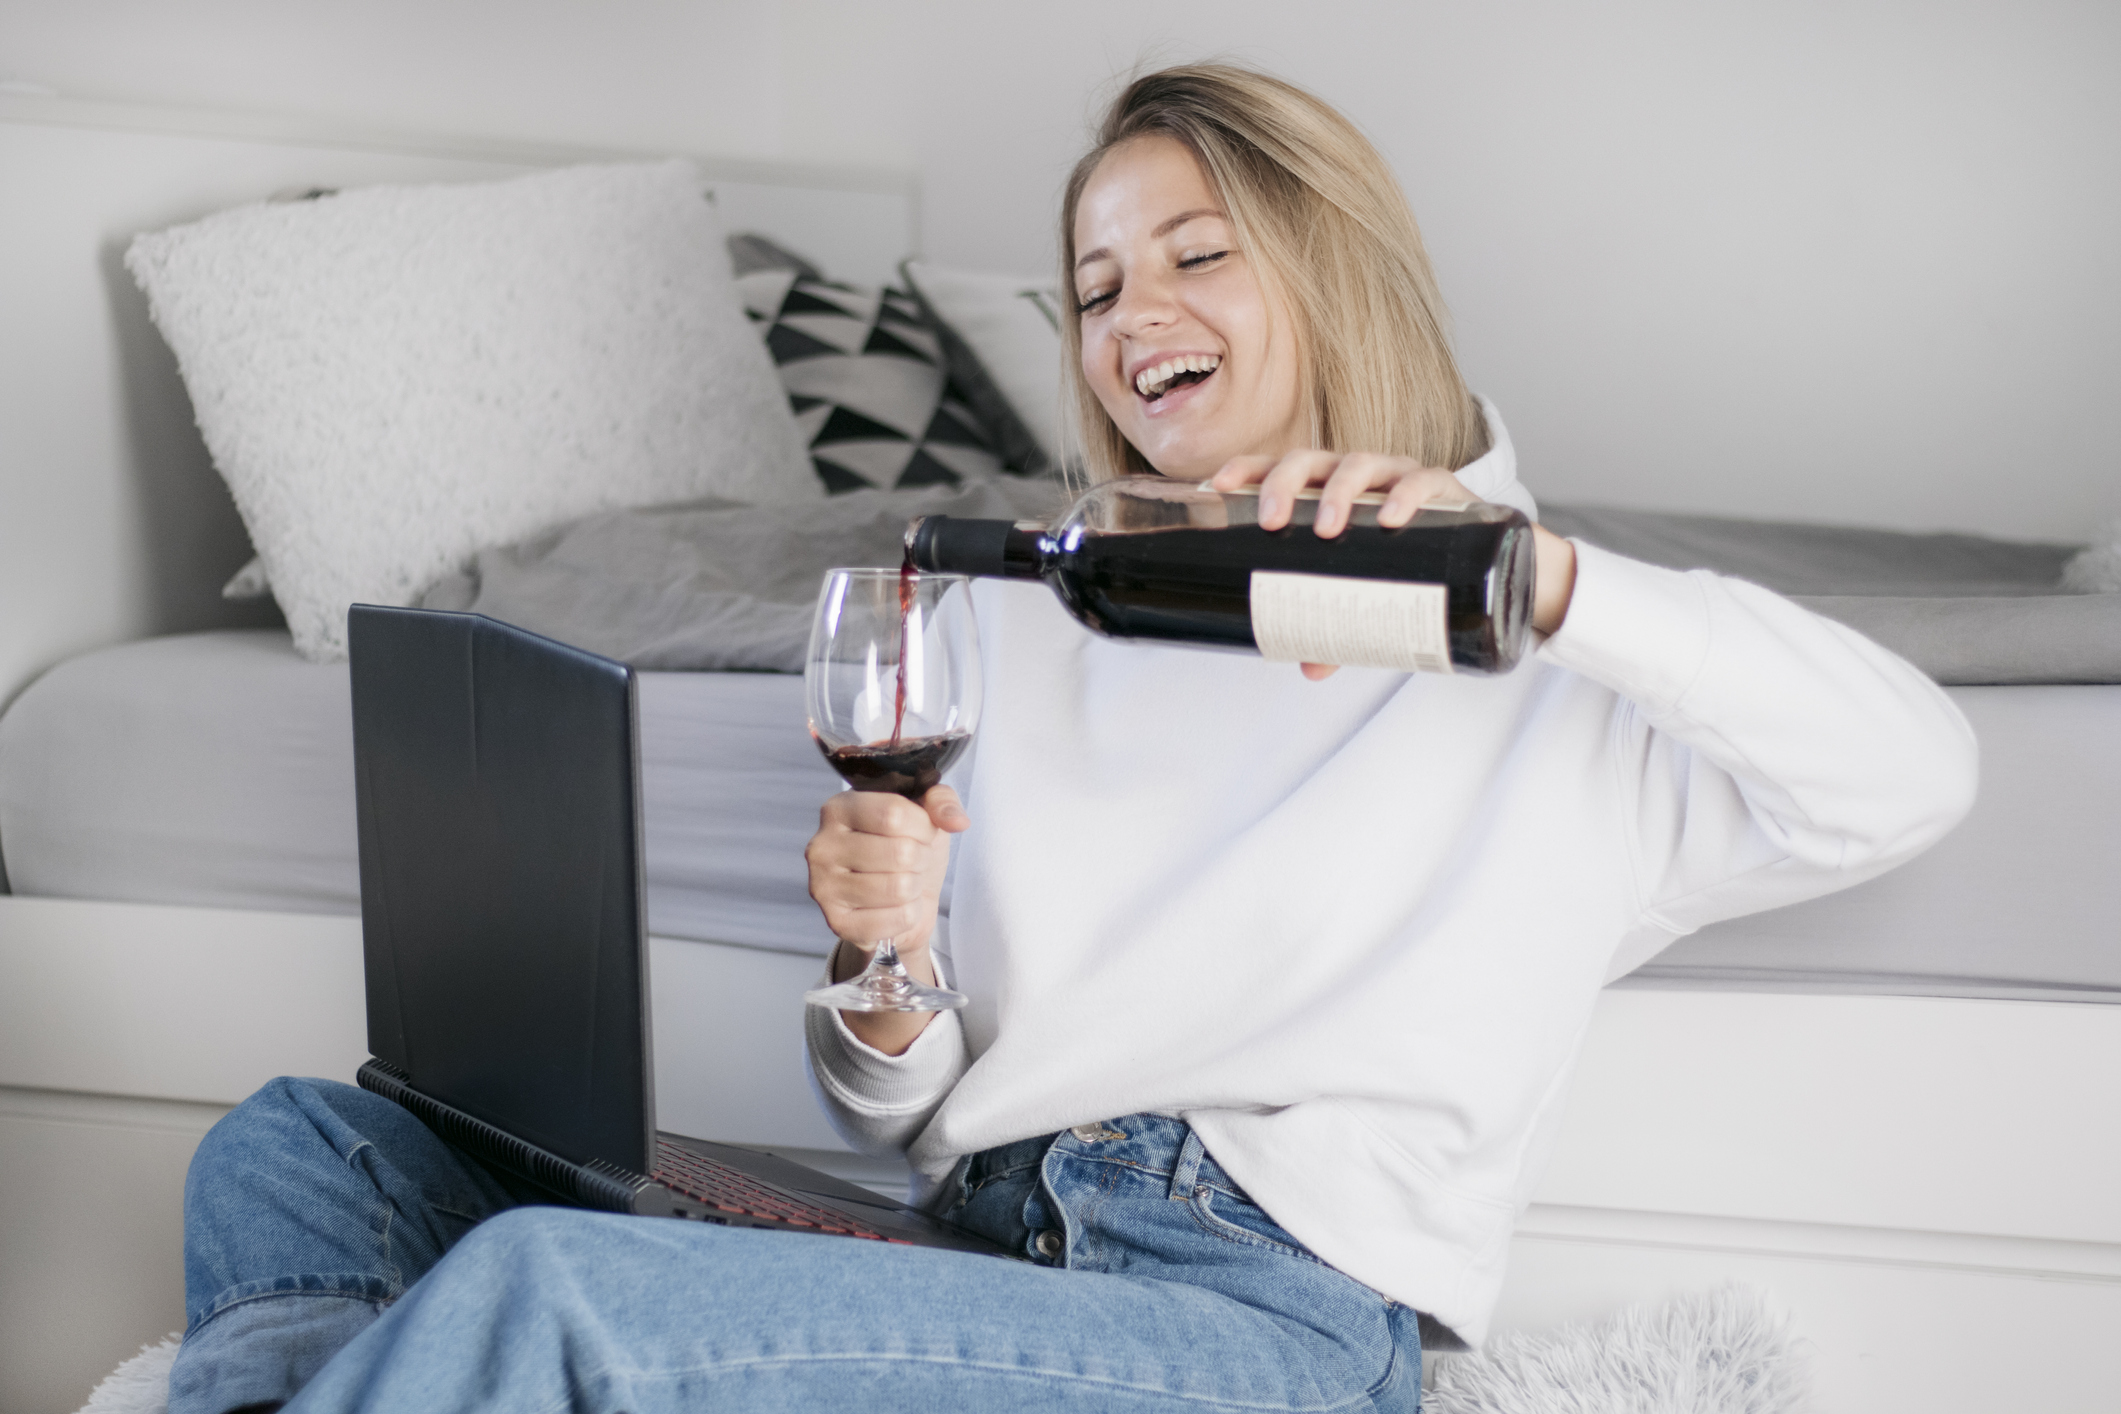 One glass of wine a day is not good for you, experts say